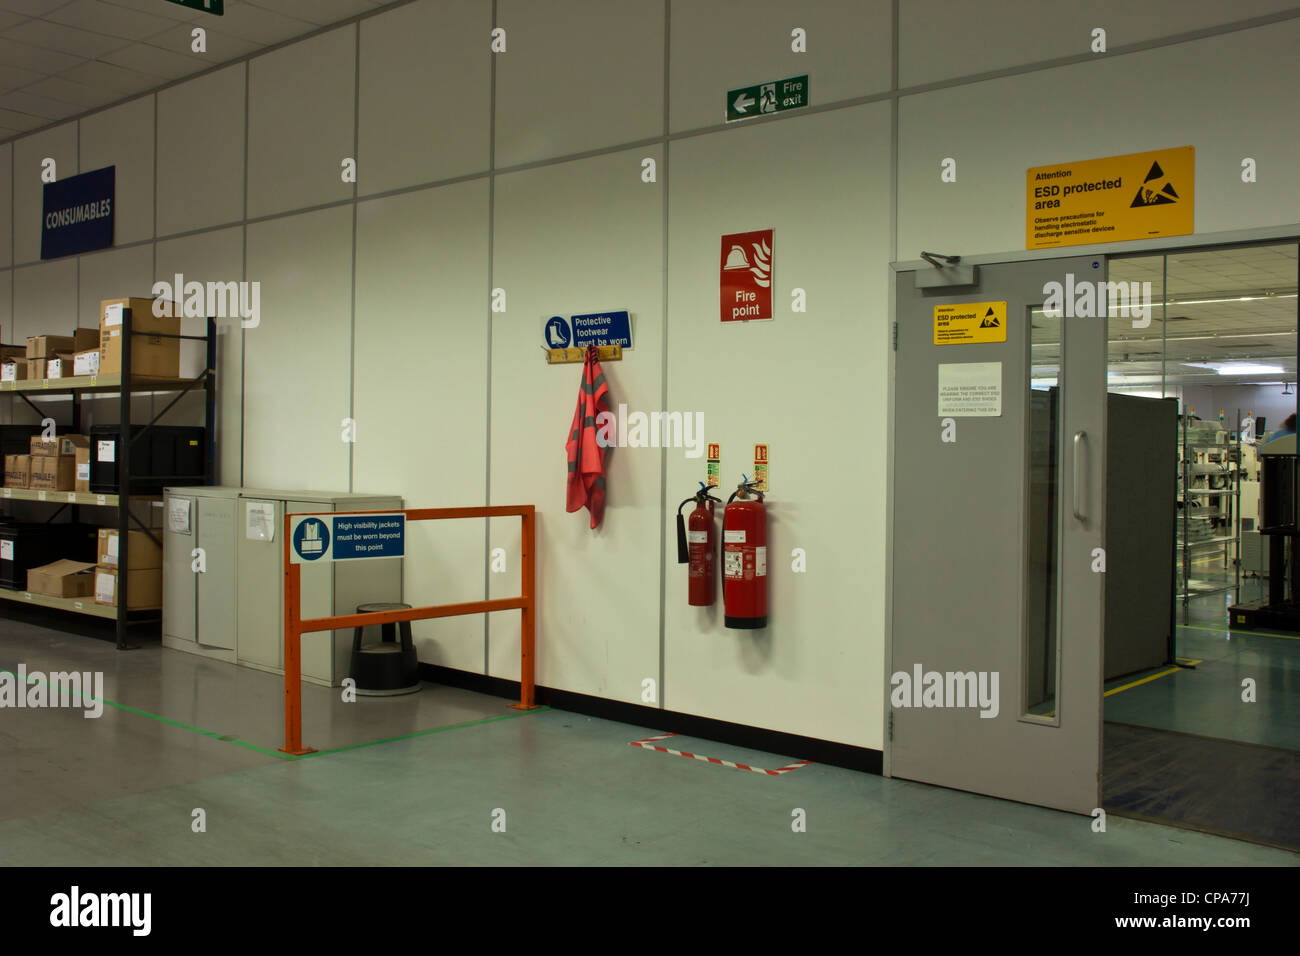 Warning notices in electronics factory manufacturing facility in UK. Stock Photo